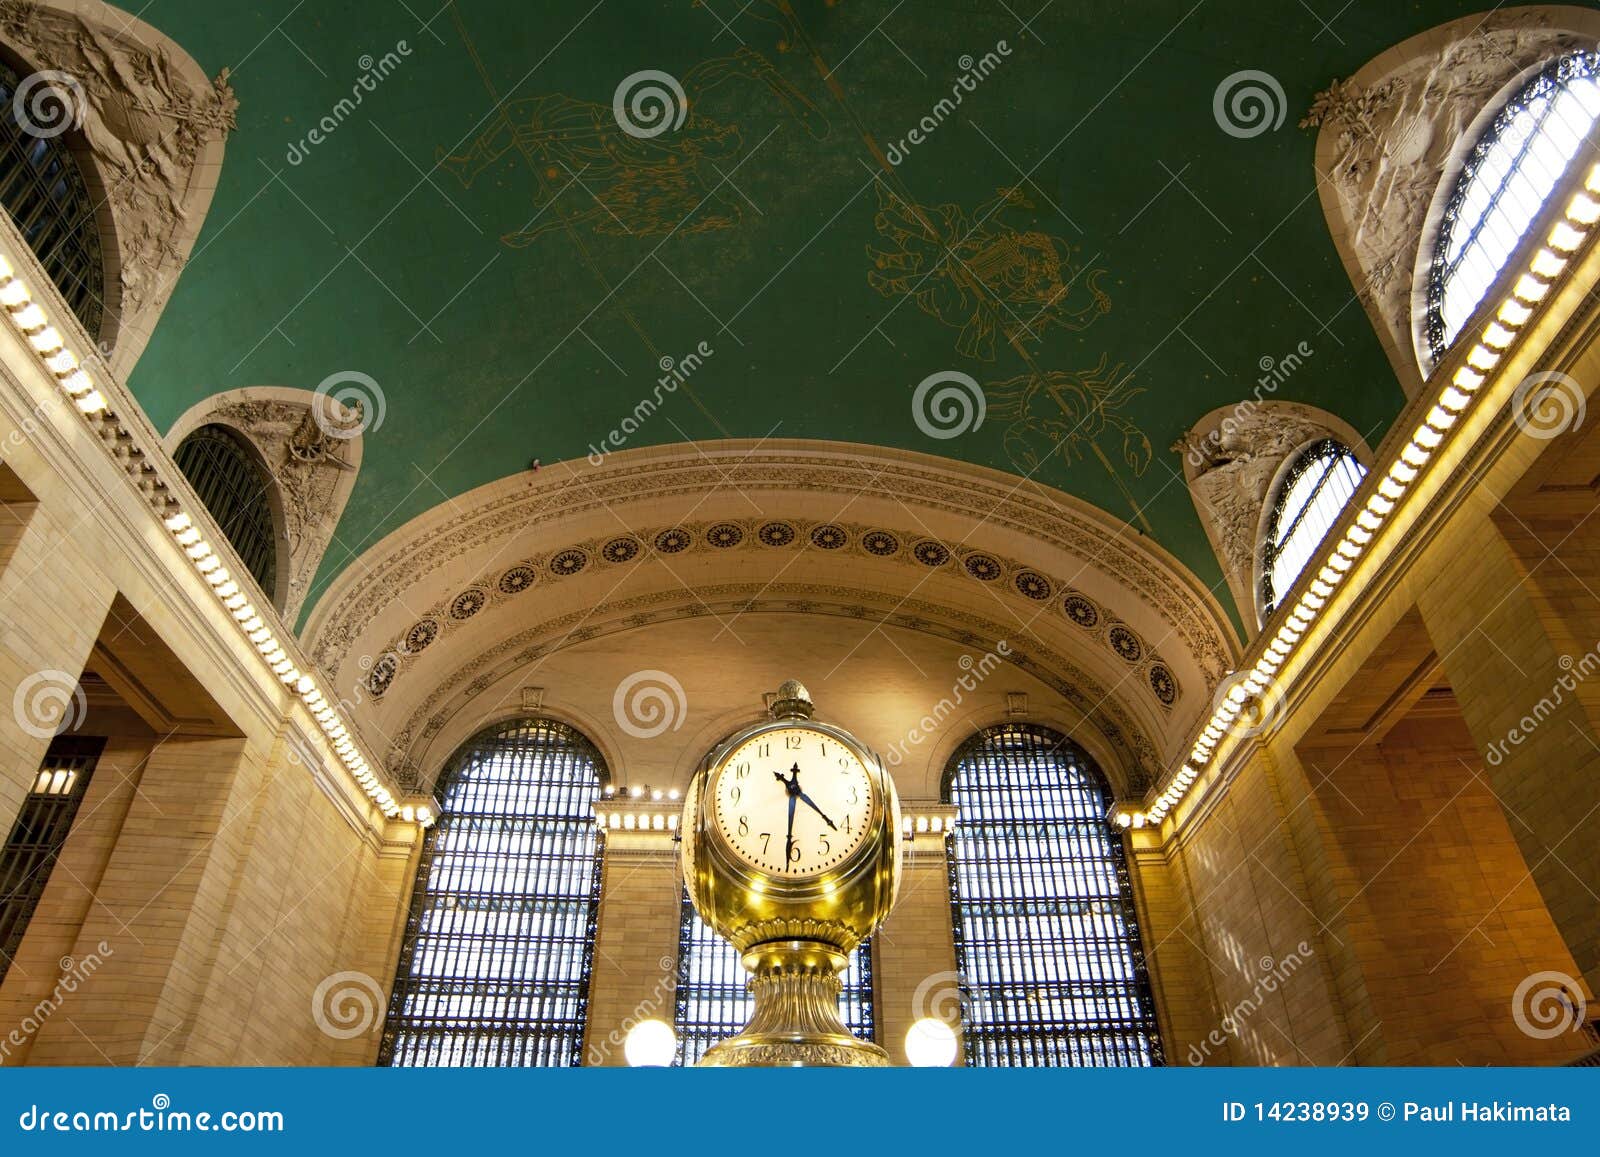 Clock In Grand Central Train Station Editorial Stock Image